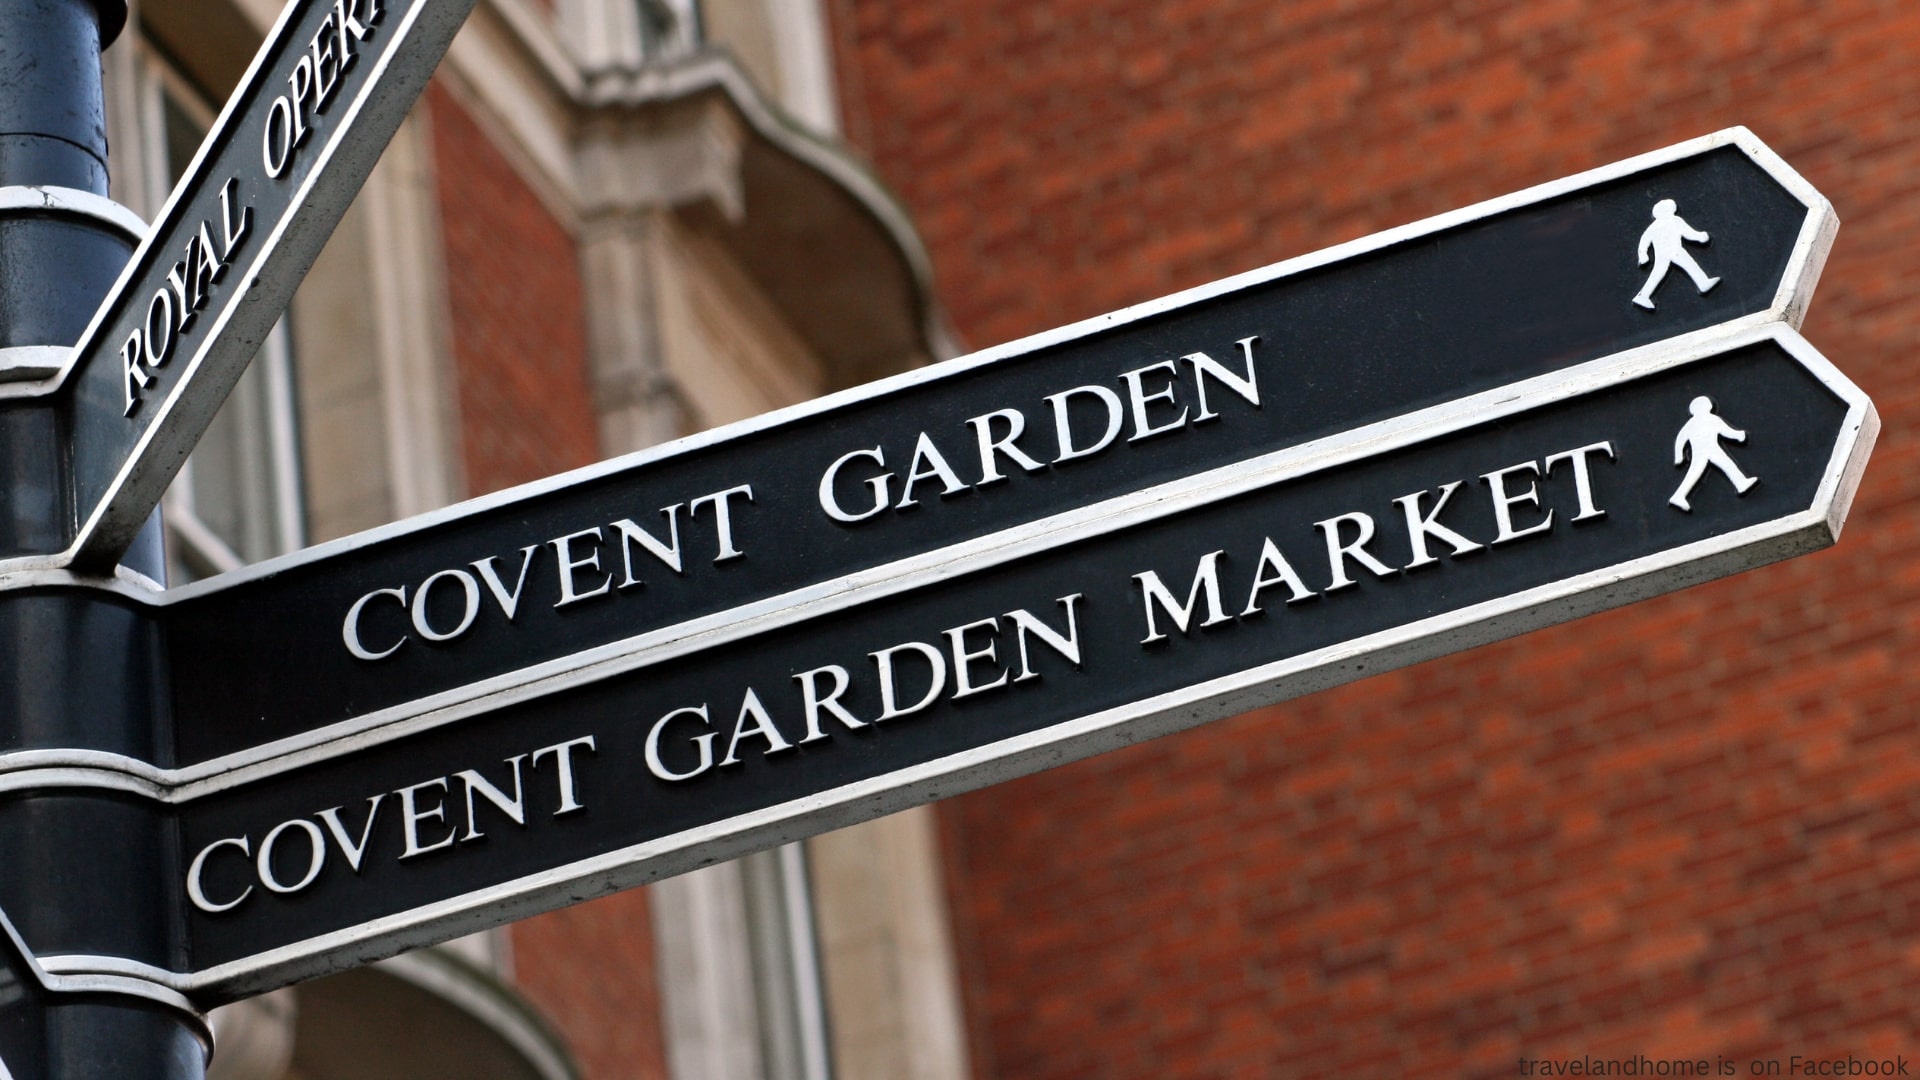 covent garden, london, nearby attractions min